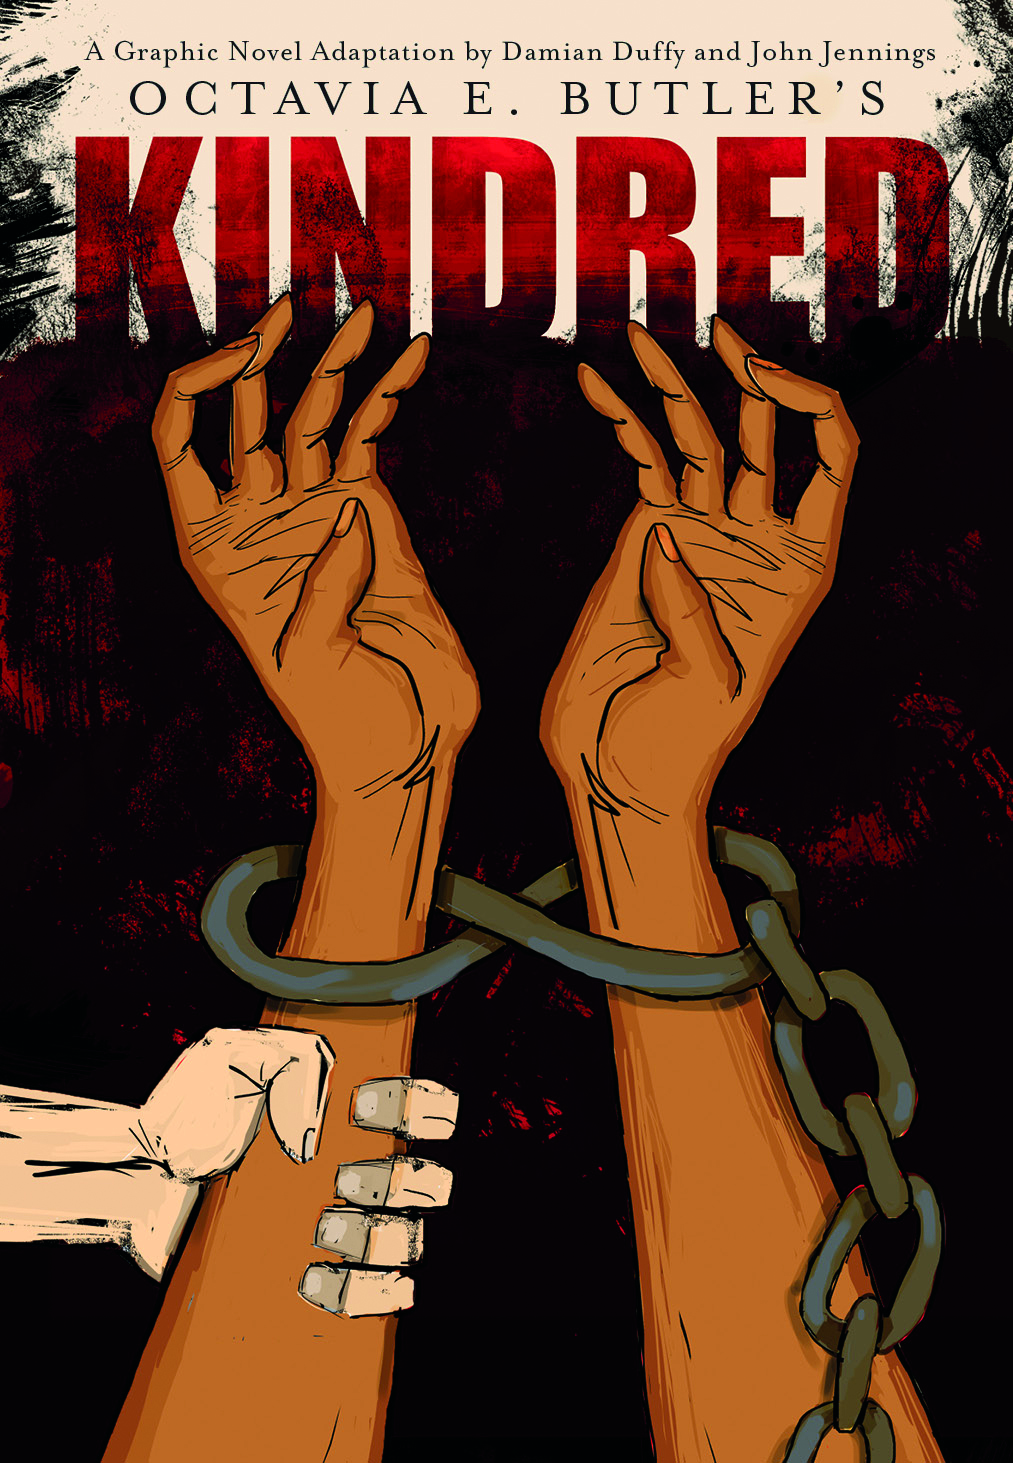 A Q&A with Damian Duffy & John Jennings on their graphic novel adaptation of Octavia Butler’s KINDRED